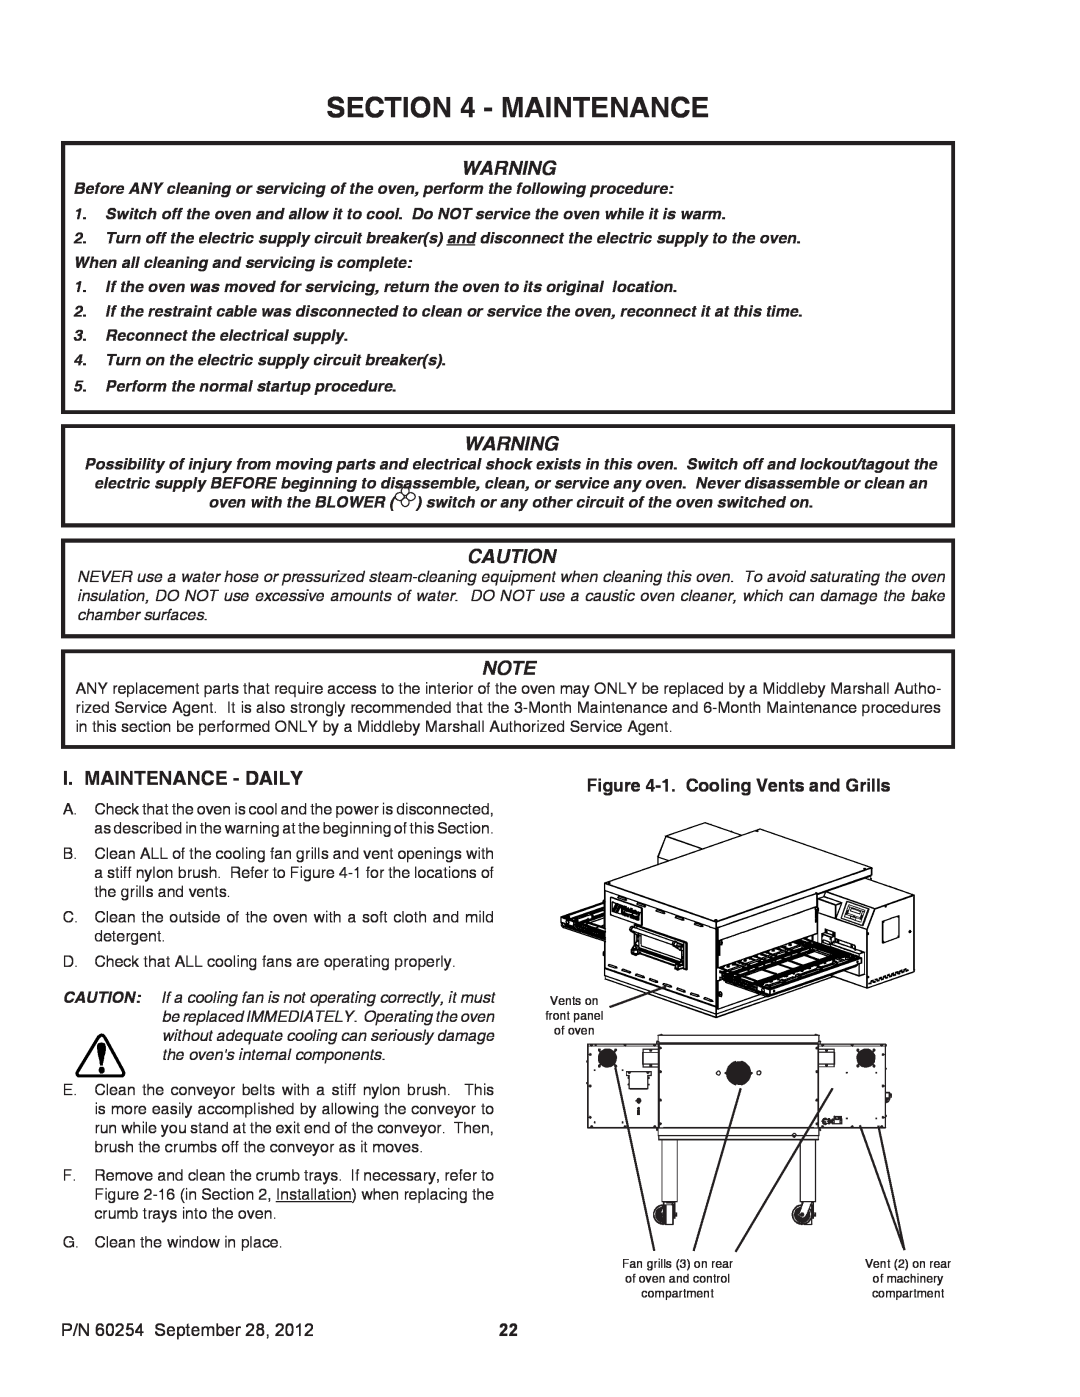 Middleby Marshall installation manual I. Maintenance - Daily, 1. Cooling Vents and Grills, P/N 60254 September 28 